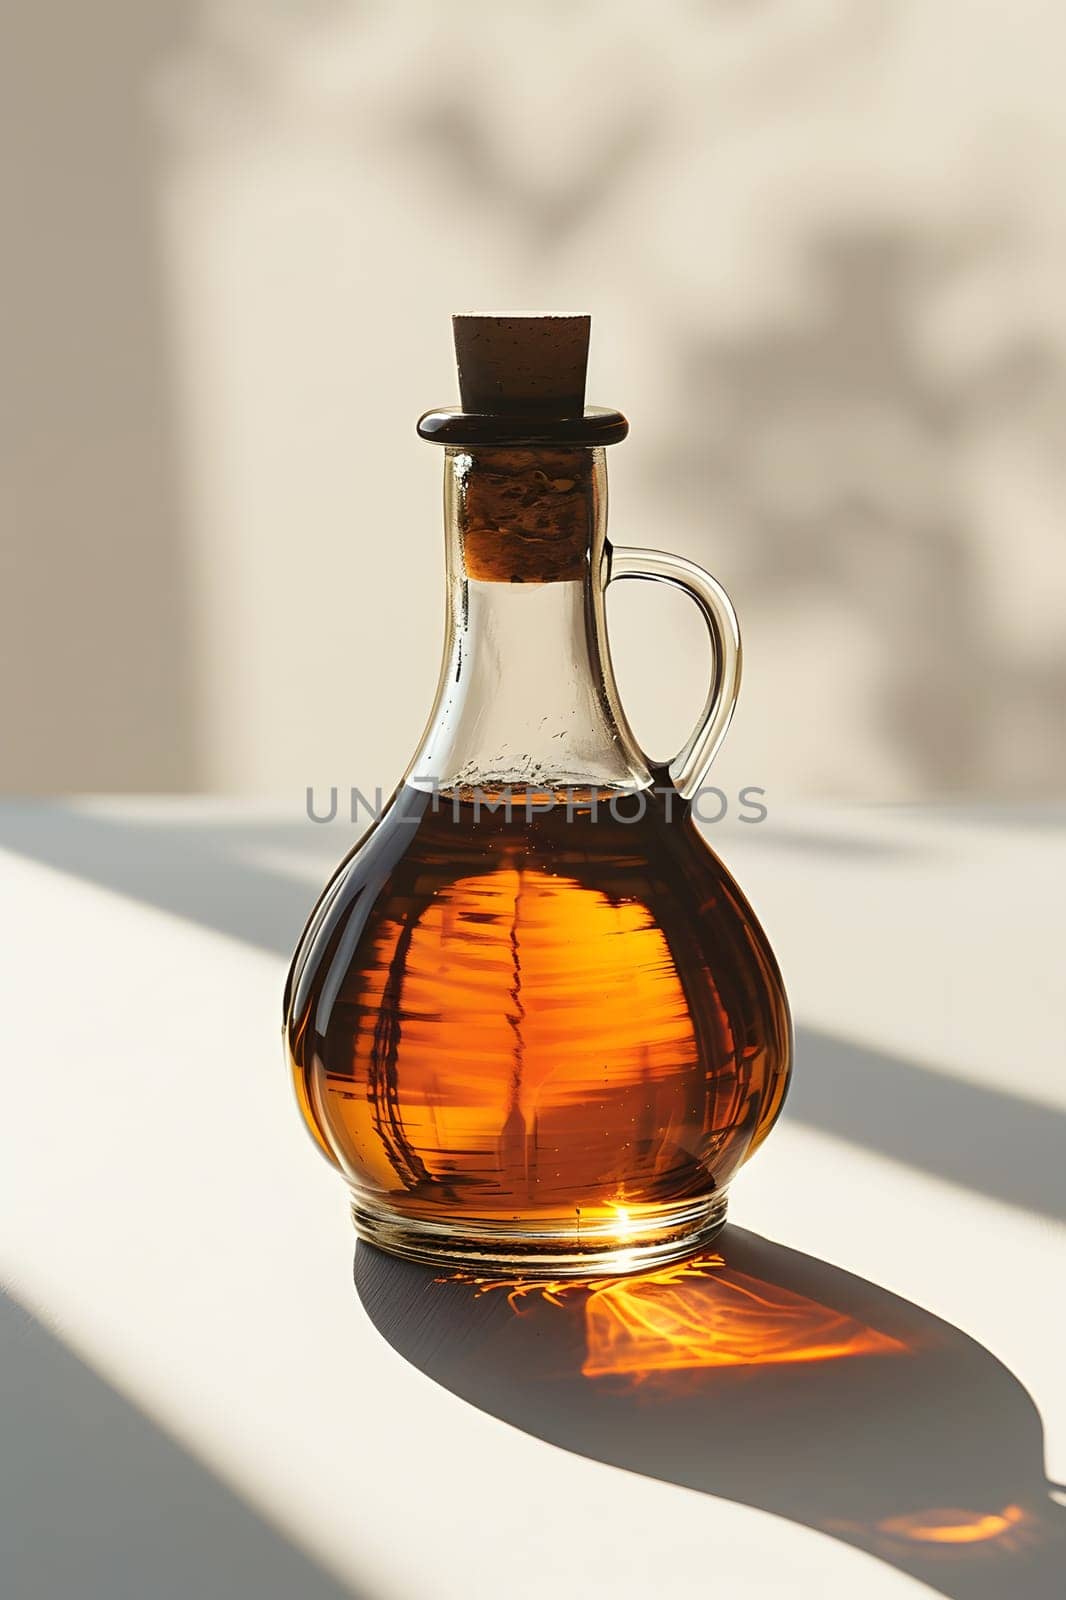 Amber liquid in glass bottle with stopper on table maple syrup by Nadtochiy